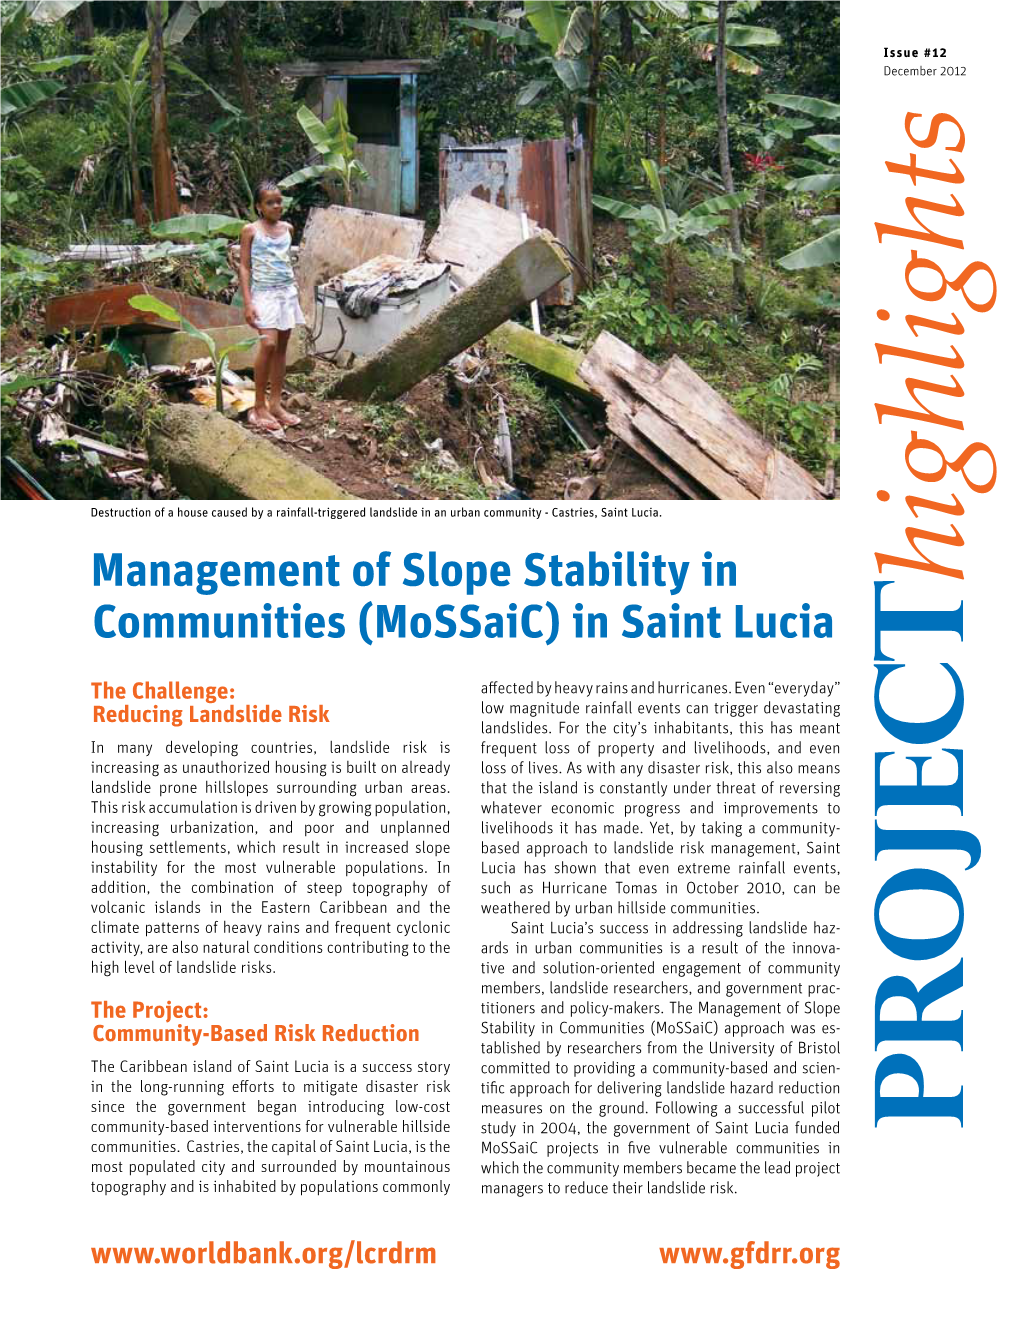 Management of Slope Stability in Saint Lucia